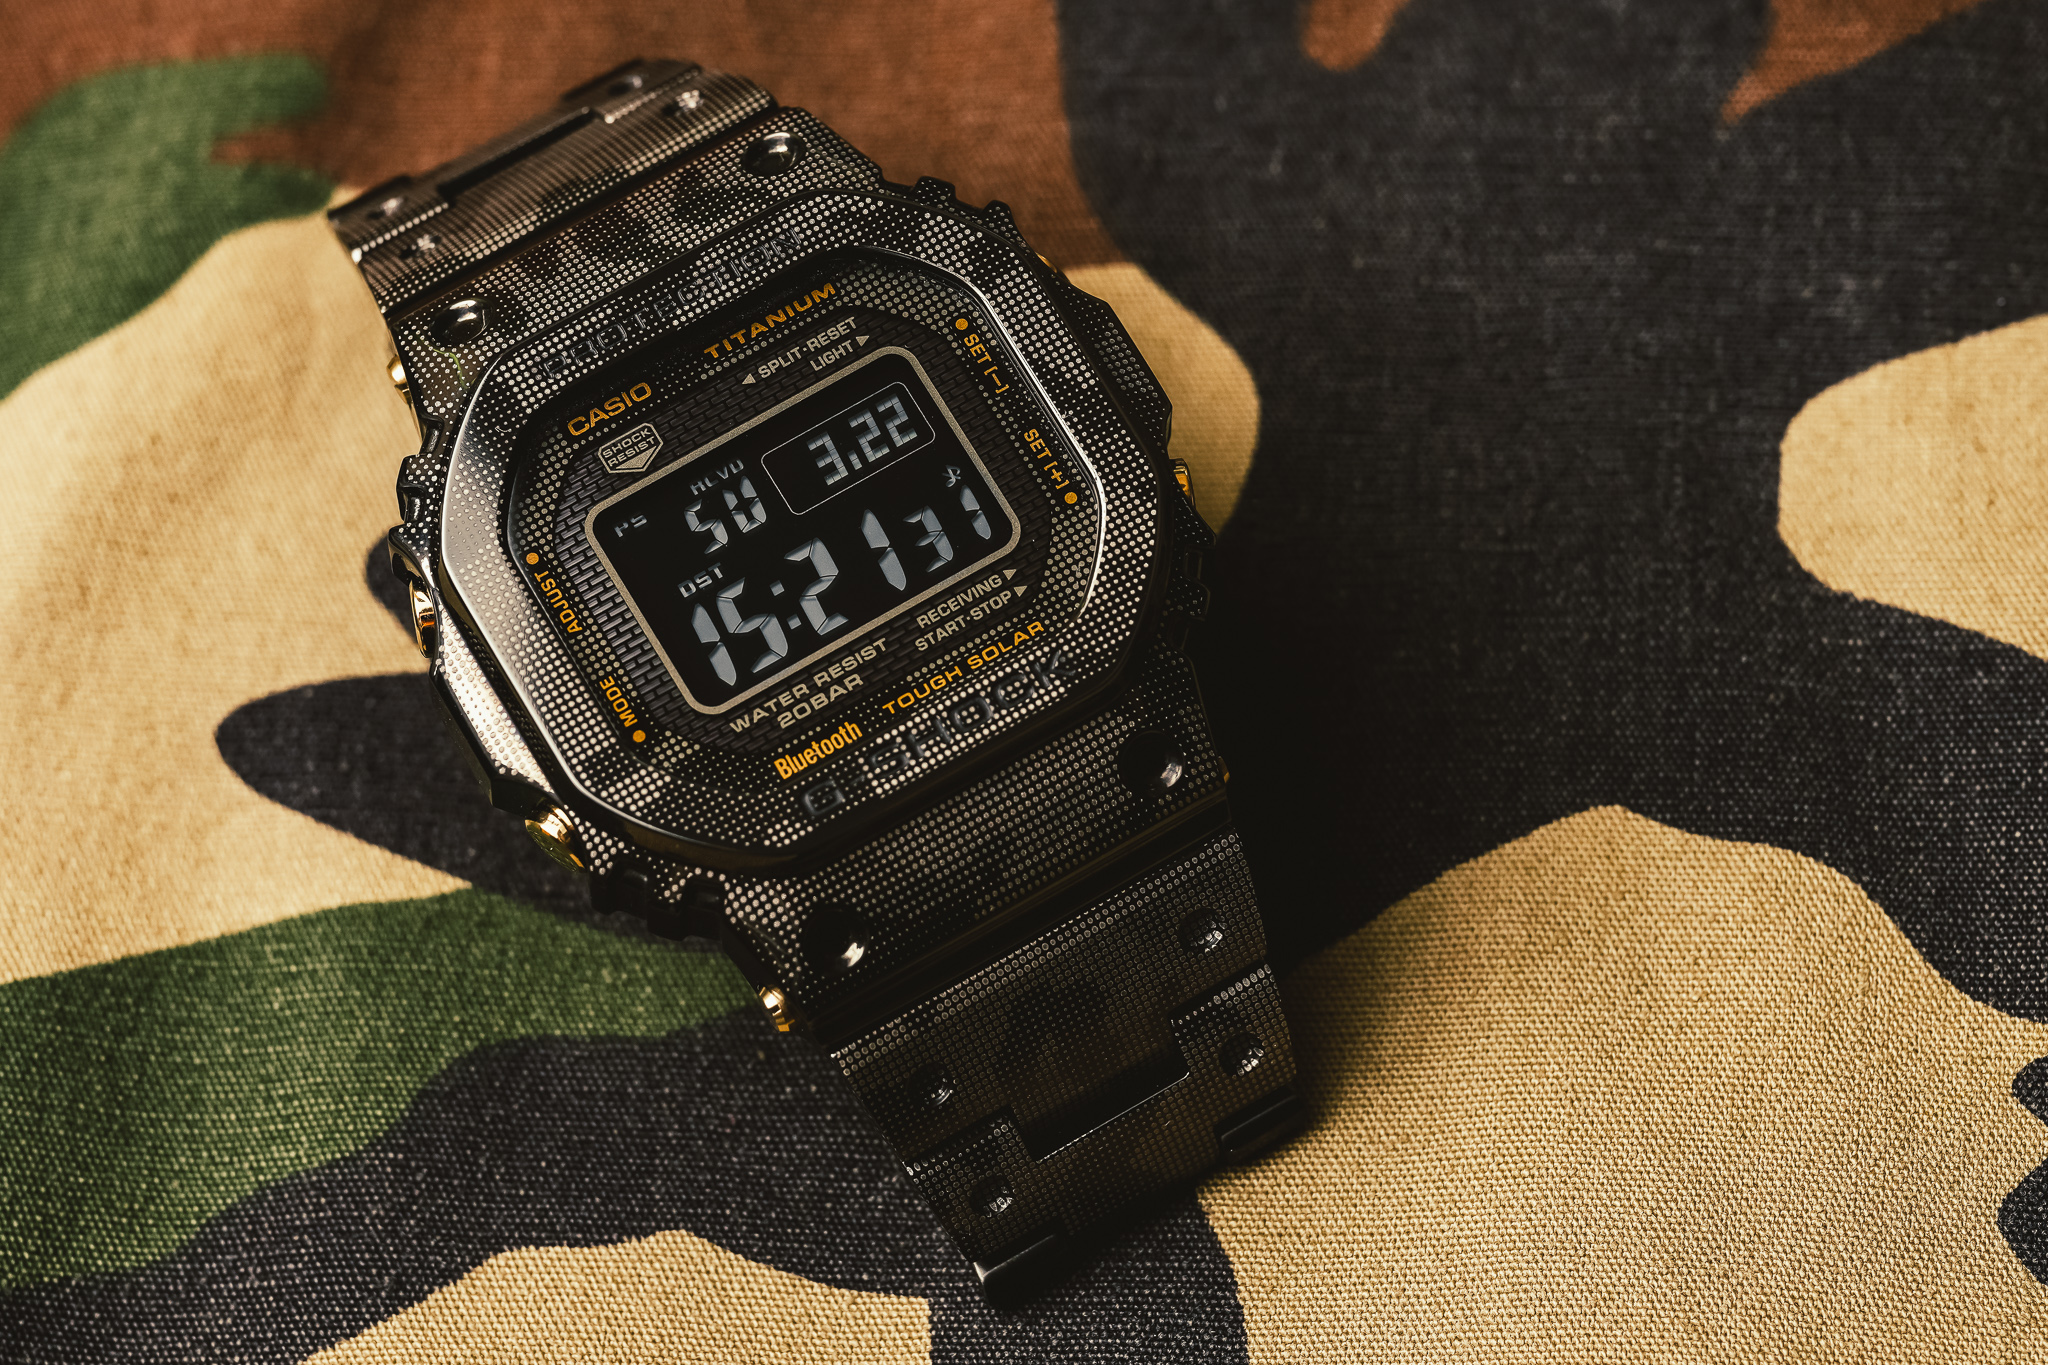 How Not To Be Seen: A Primer On Camouflage With The Casio G-Shock 